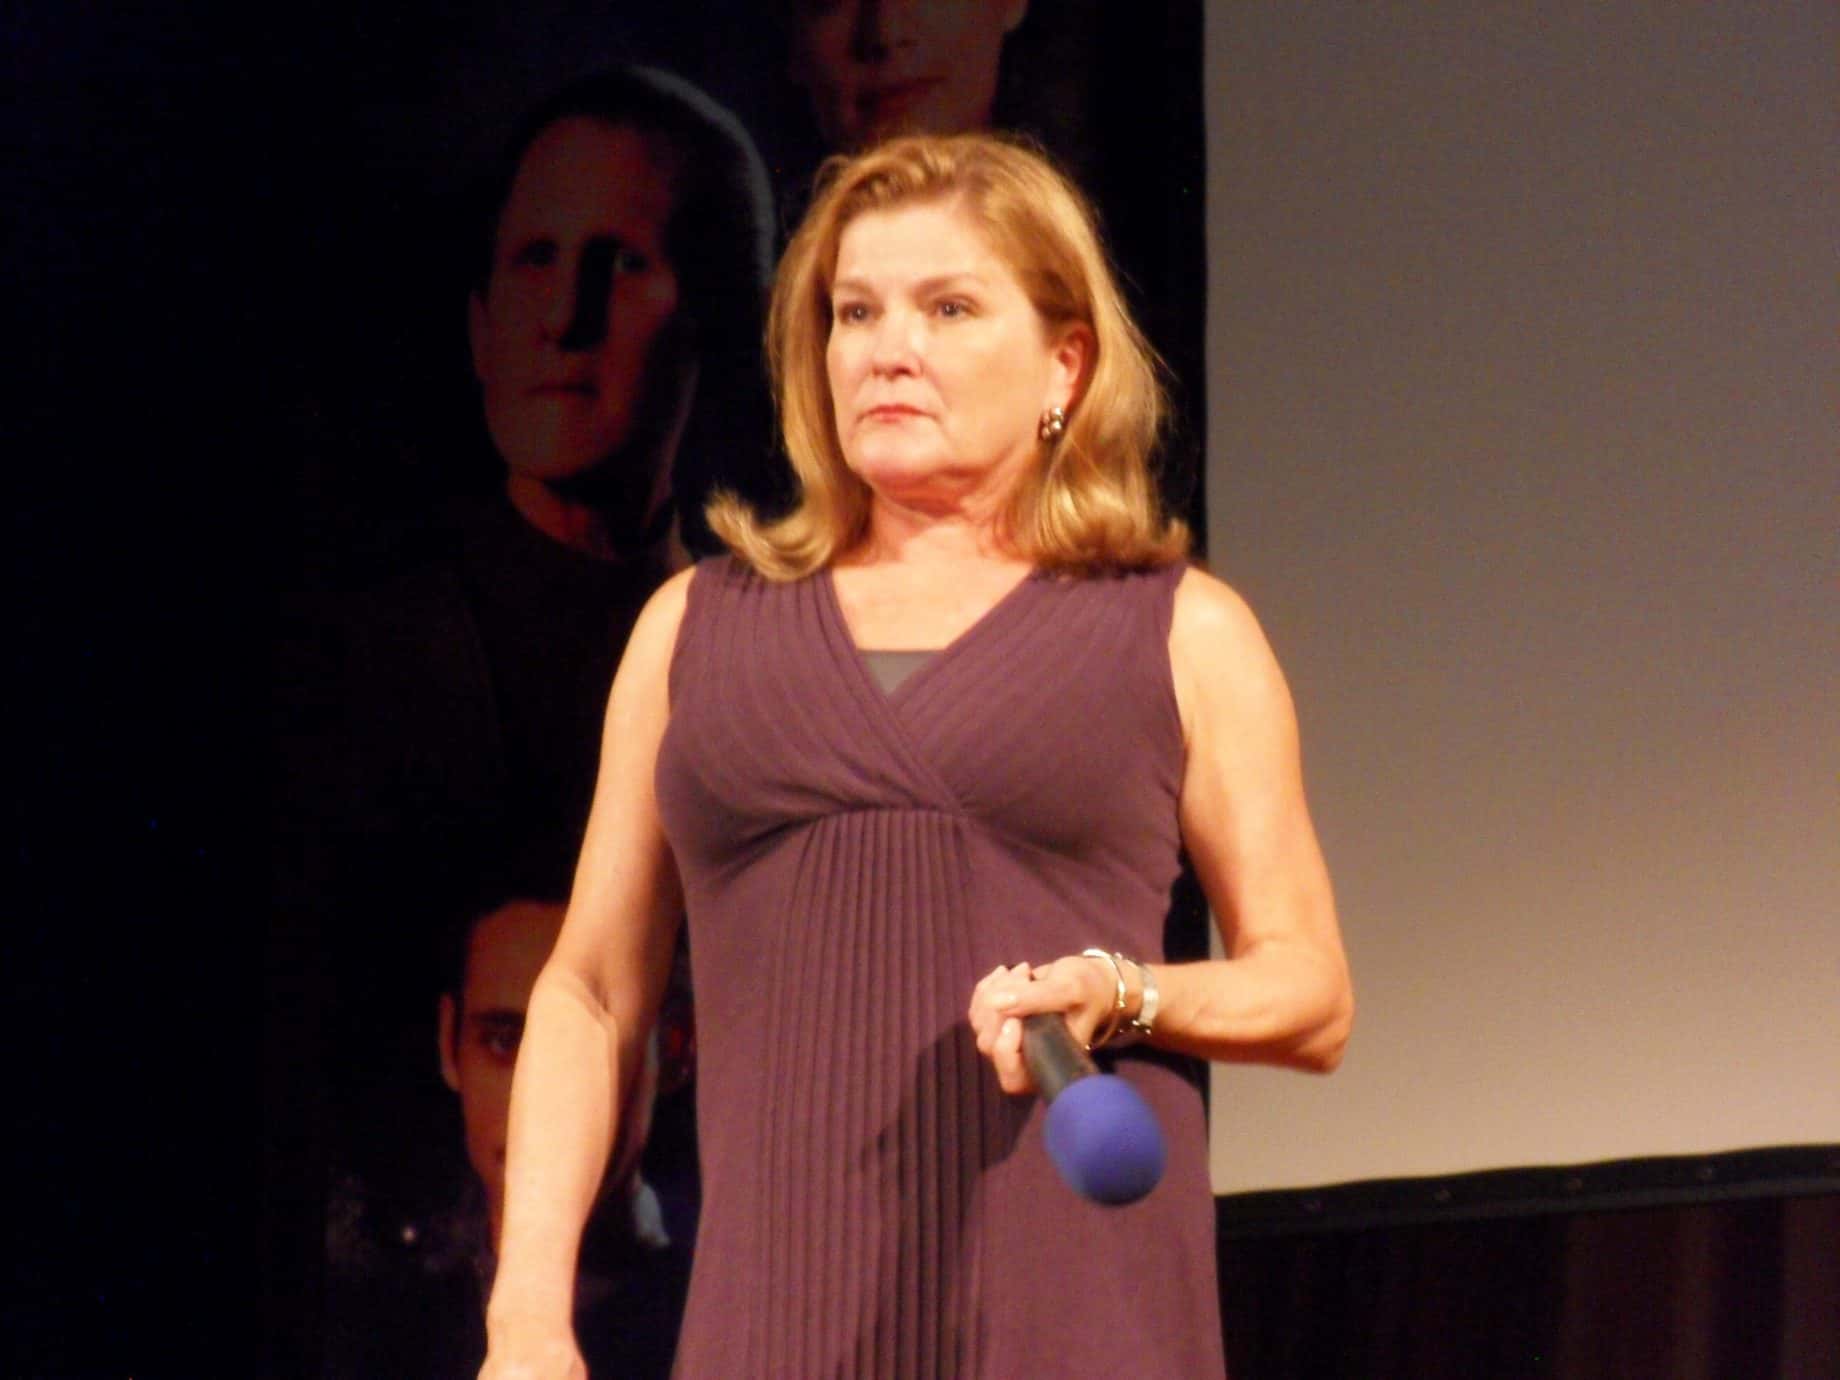 <p>When Geneviève Bujold decided to leave <em>Star Trek: Voyager</em>, veteran actress Kate Mulgrew took over the role of Captain Kathryn Janeway. She said that her favorite thing about being on the show was the "privilege and challenge" of being able to take on the role of the first female captain, and being able to transcend stereotypes in front of millions of viewers.</p>